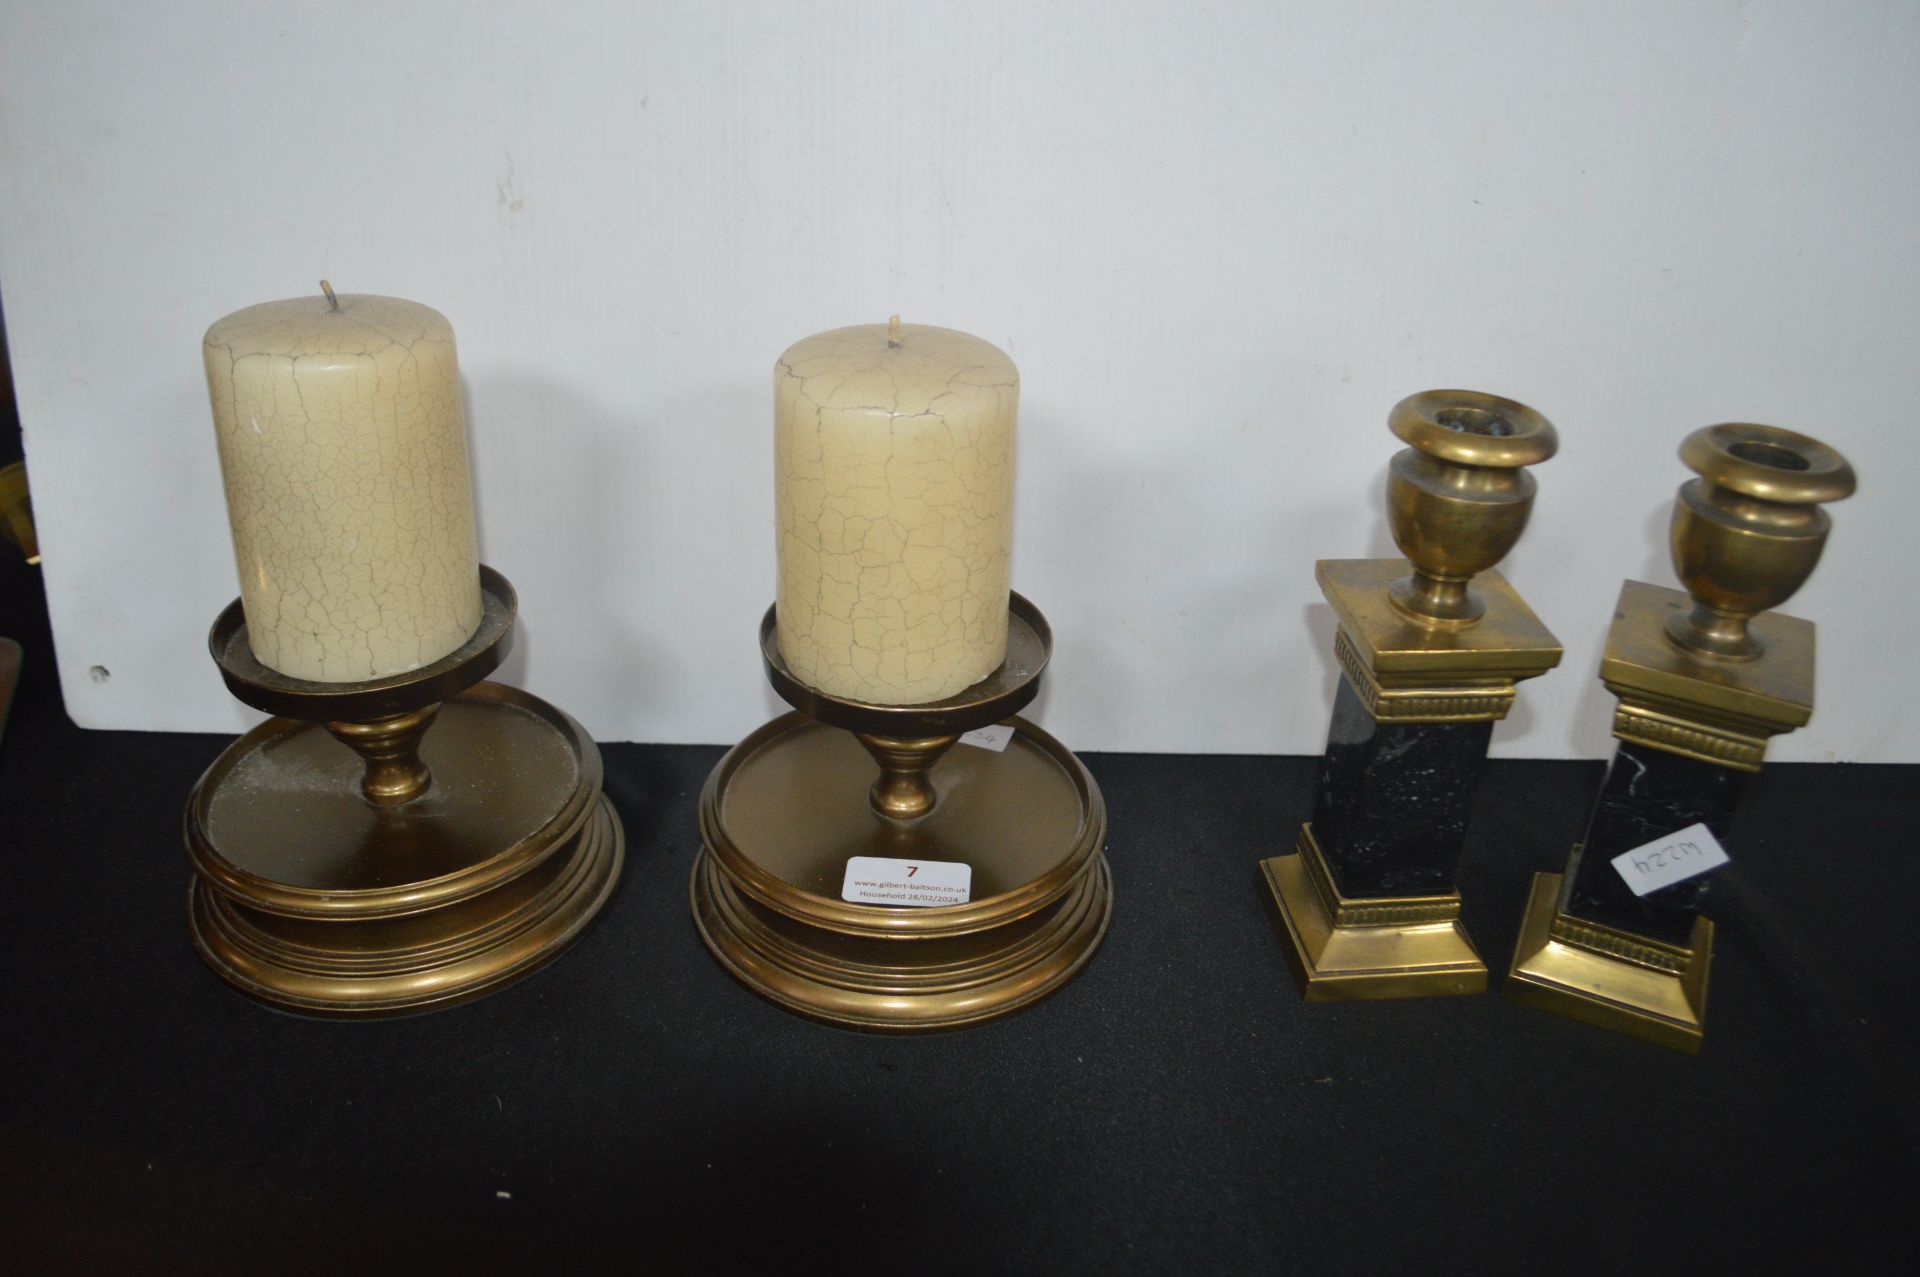 Two Pairs of Brass Candlesticks (one with marble)